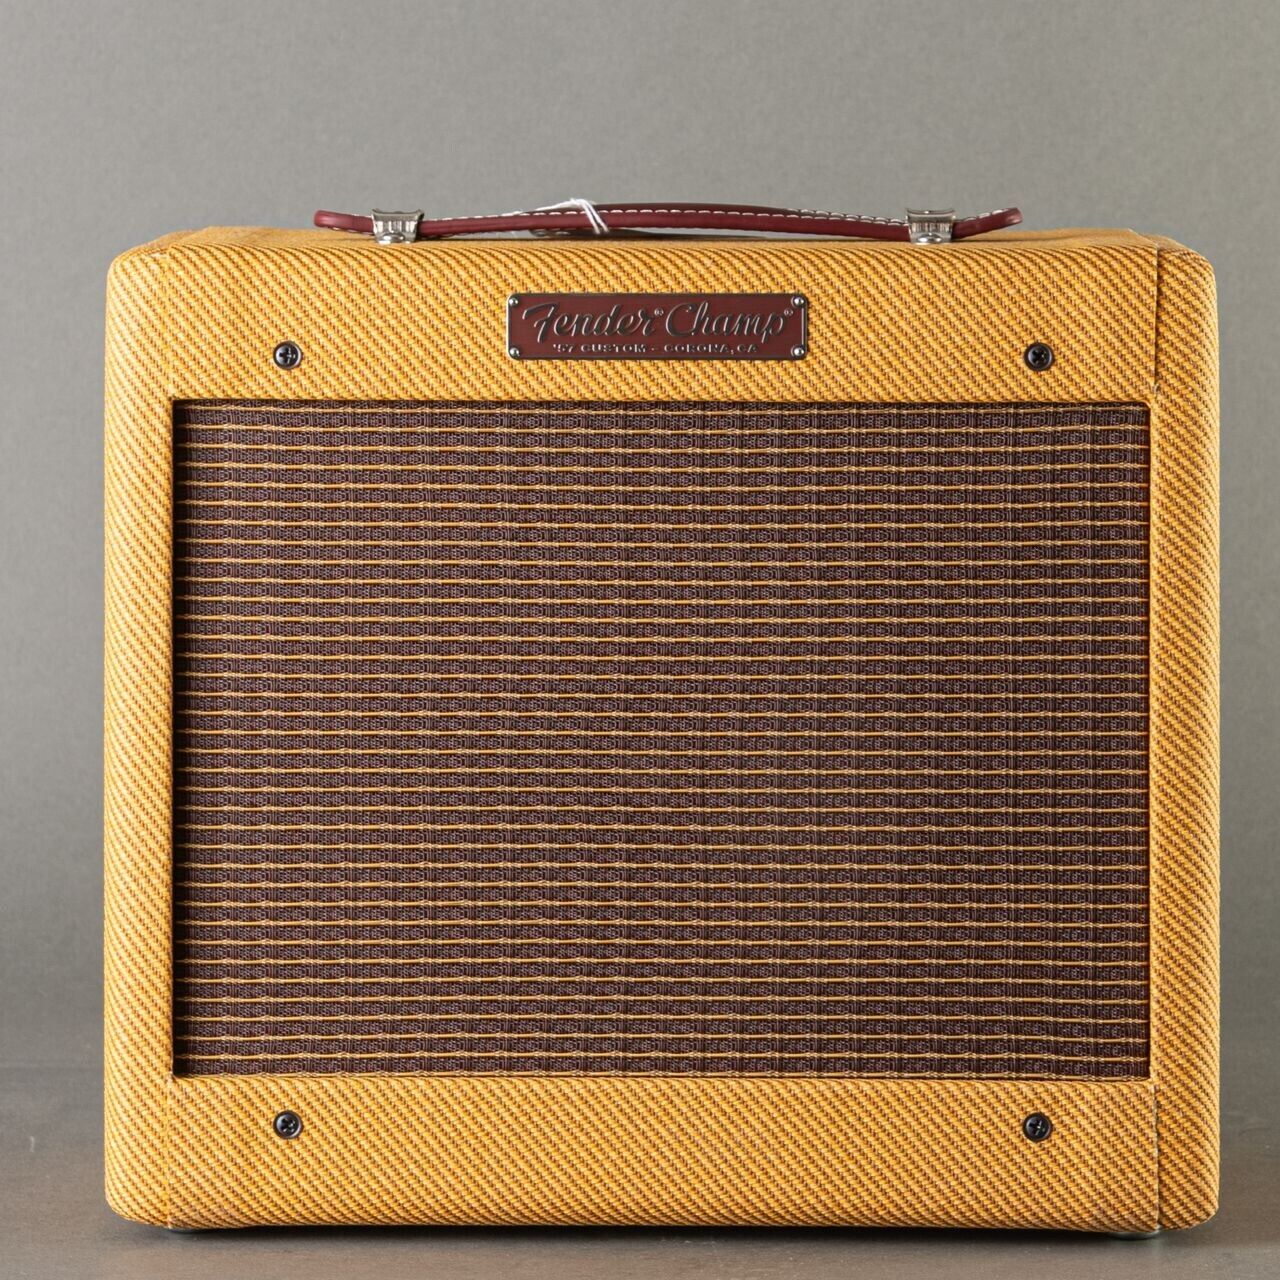 Fender Custom Champ 5-W Tube Guitar Amplifier - Lacquered Tweed